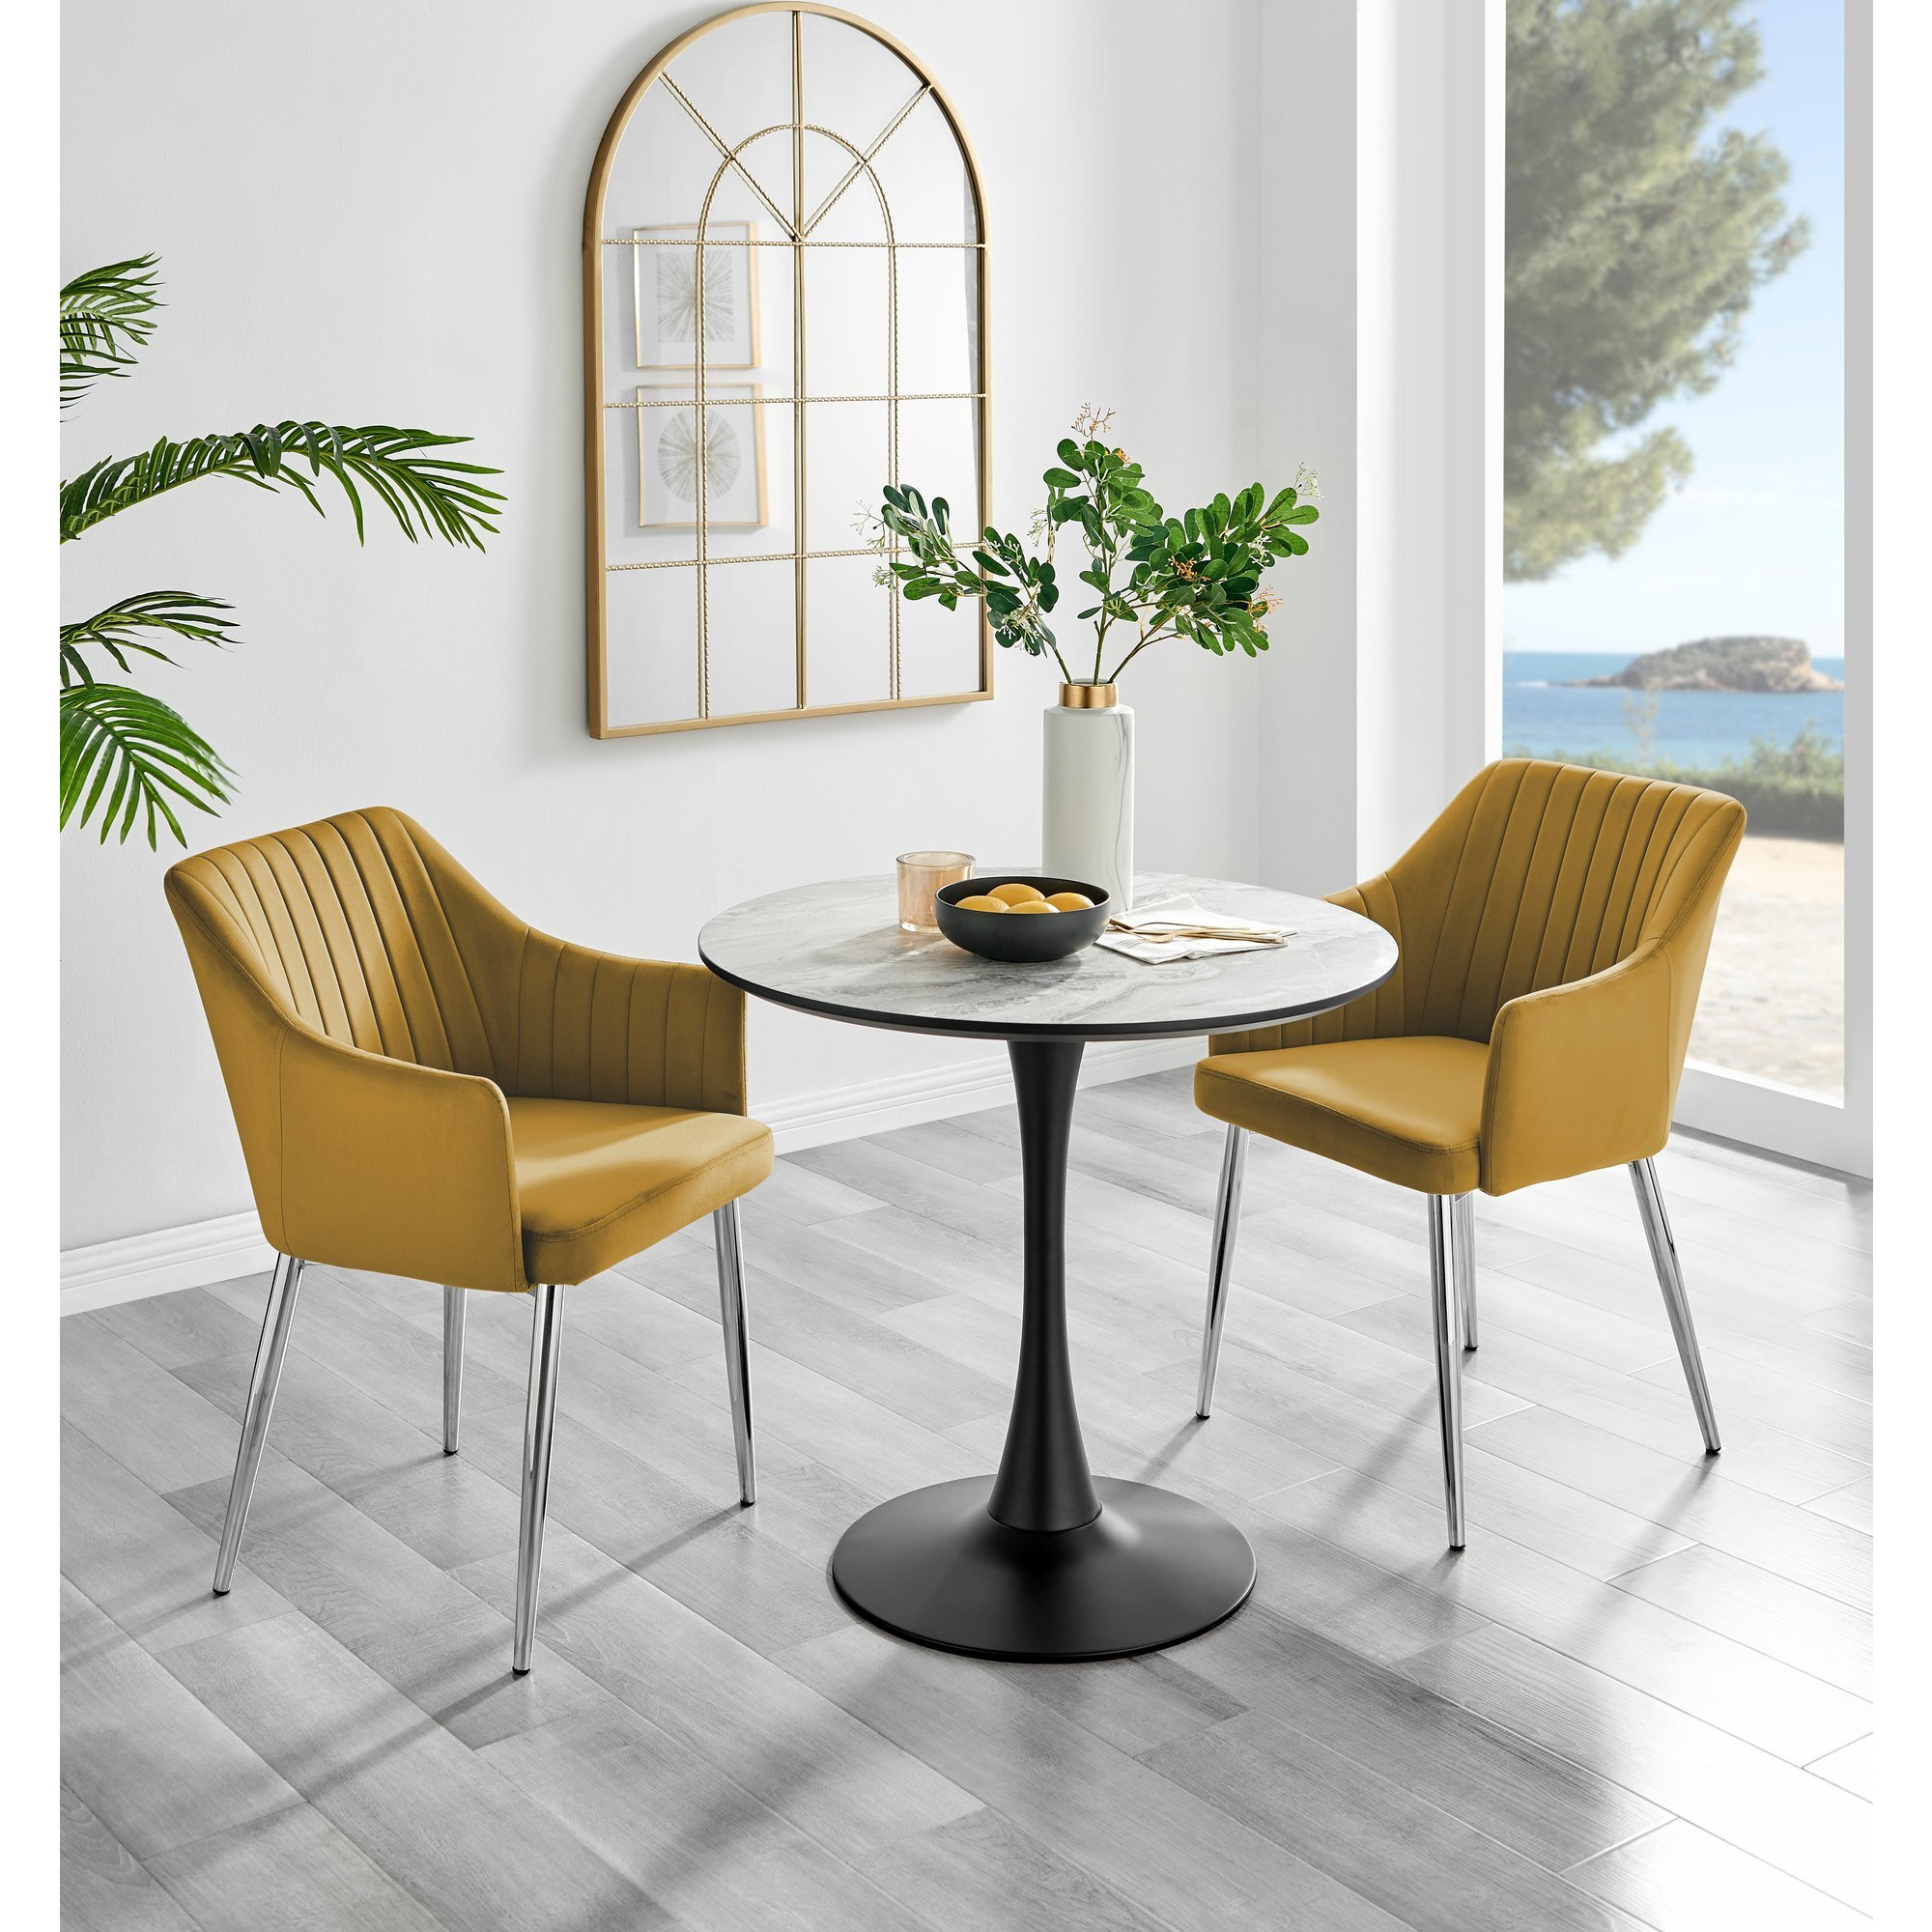 Elina White Marble Effect Round Dining Table & 2 Calla Silver Leg Chairs